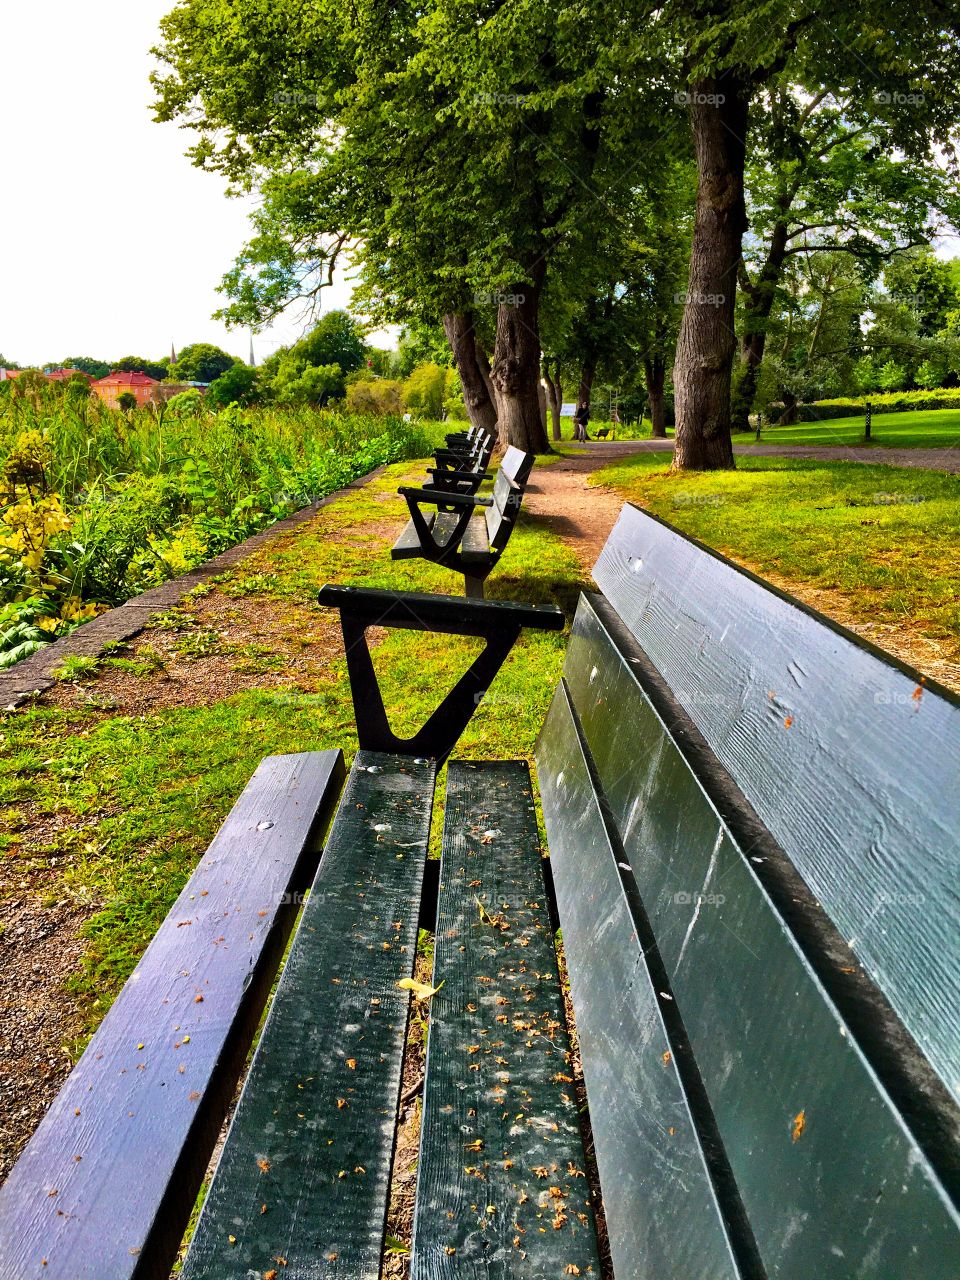 Park bench in road! 